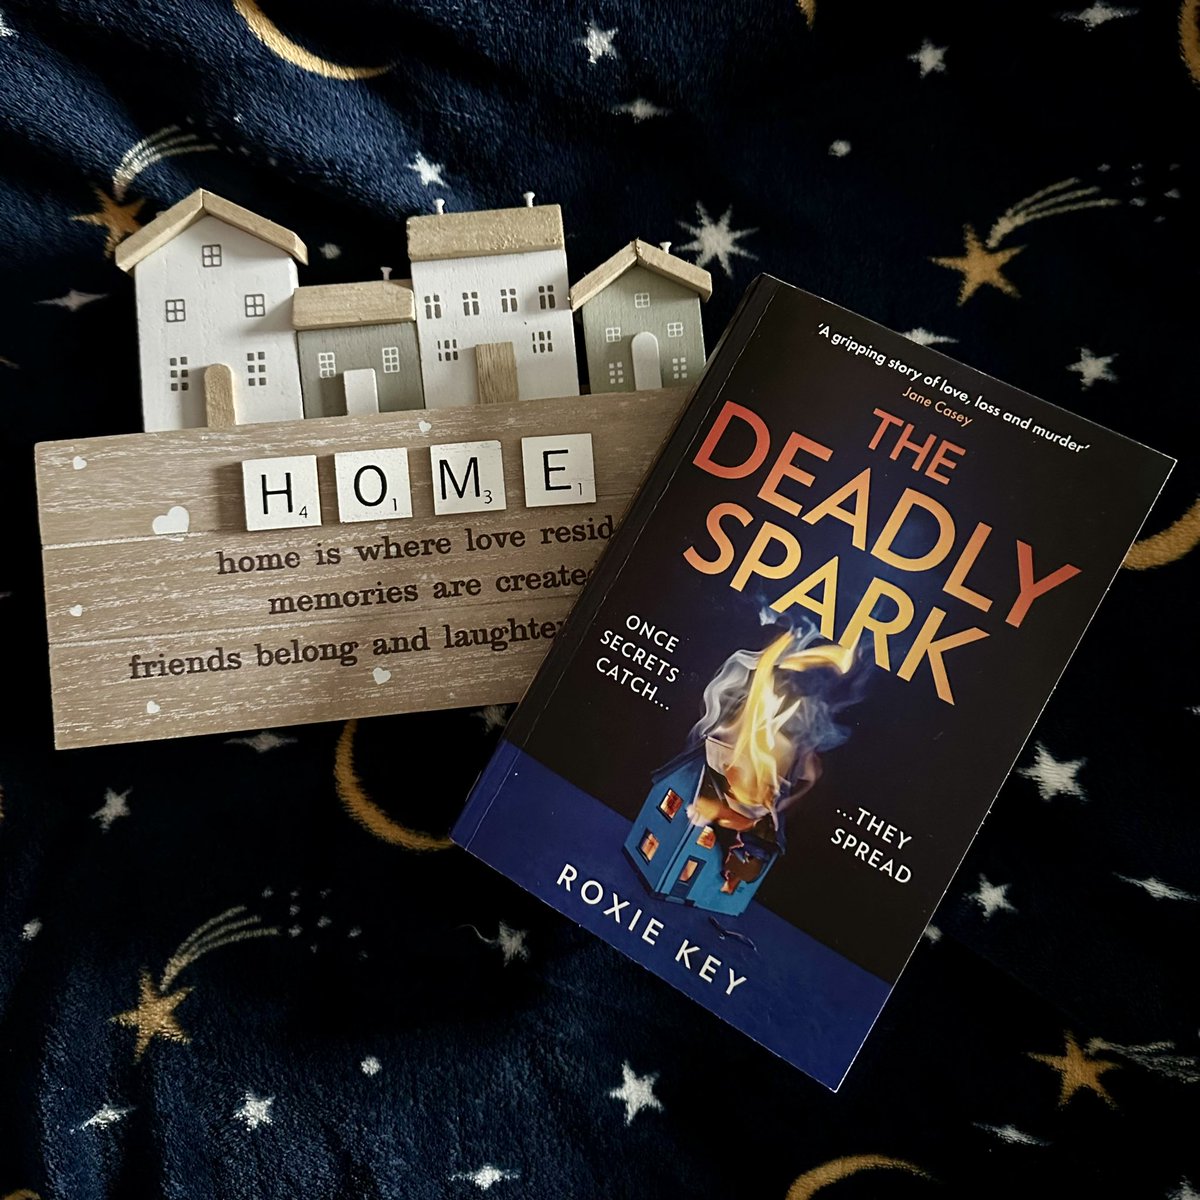 📚#BookReview📚 4⭐️ A #PublicationDay review for #TheDeadlySpark by @RoxieAdelleKey @HQstories 🏠 Once secrets catch… they spread An amazing debut thriller from this author, you won’t be able to put it down! 🔥 🔗Full Review in thread below #BookTwitter #Bookblogger